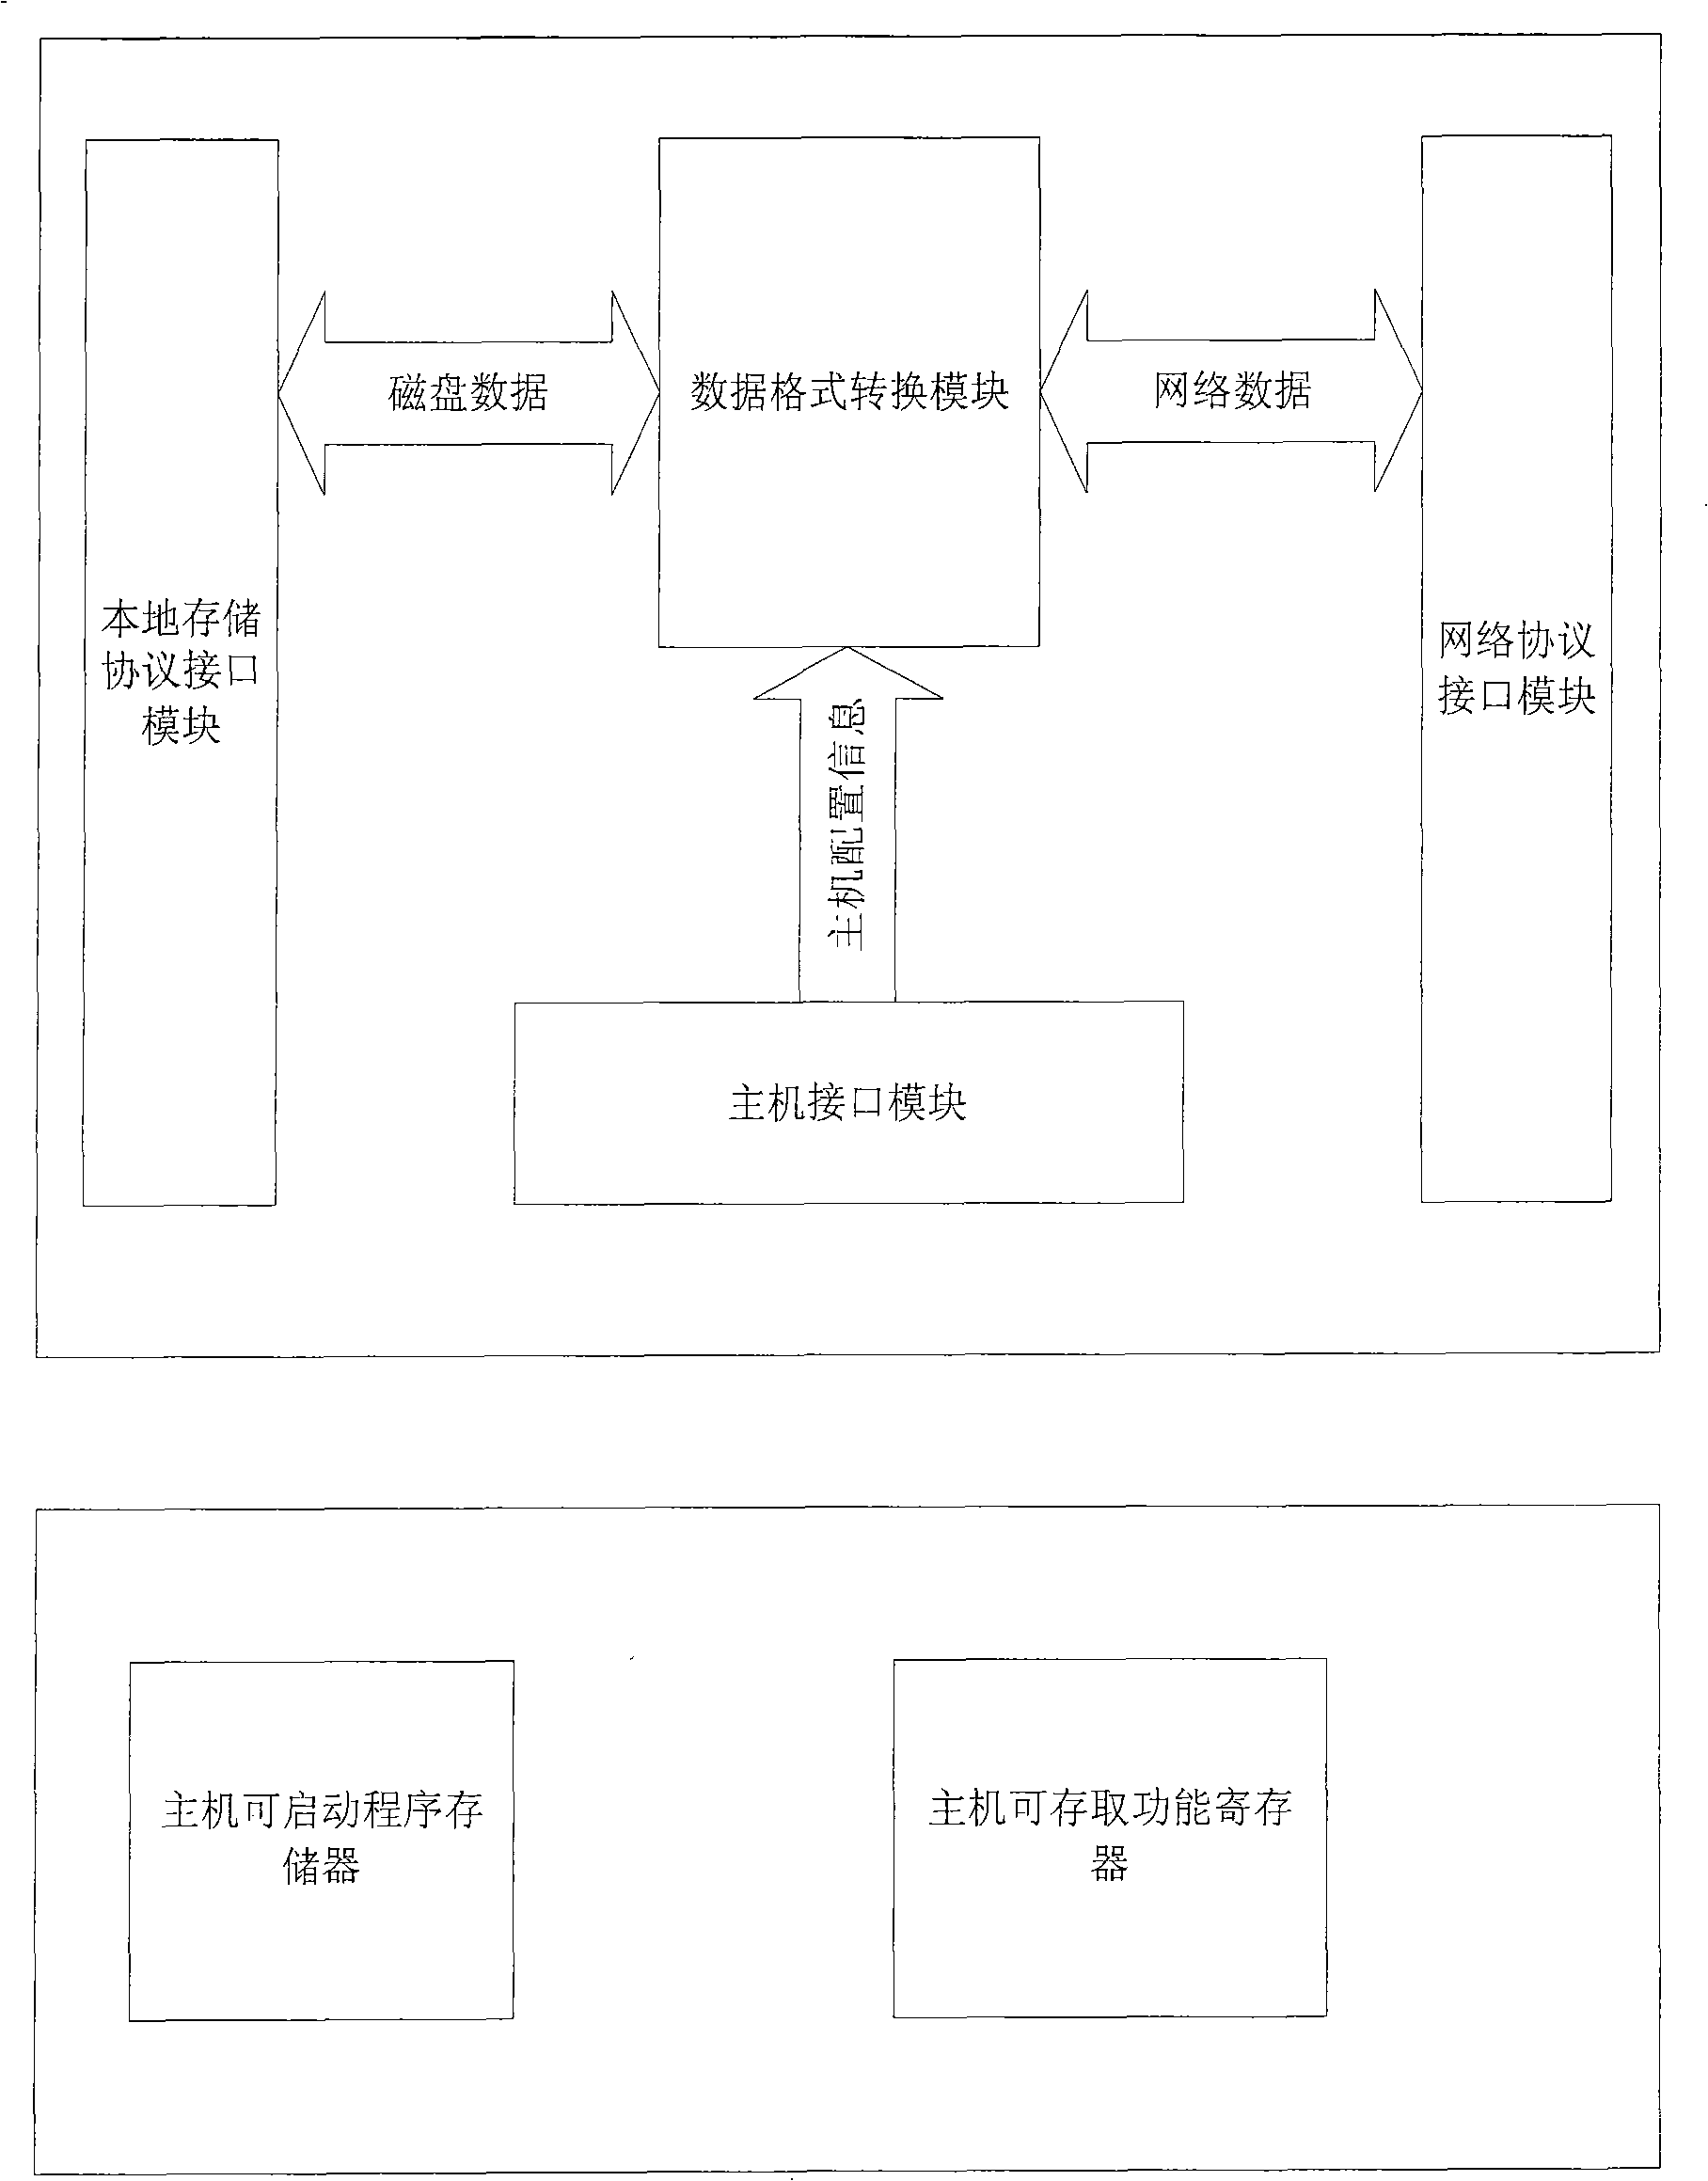 Apparatus for binding compute resource and memory resource